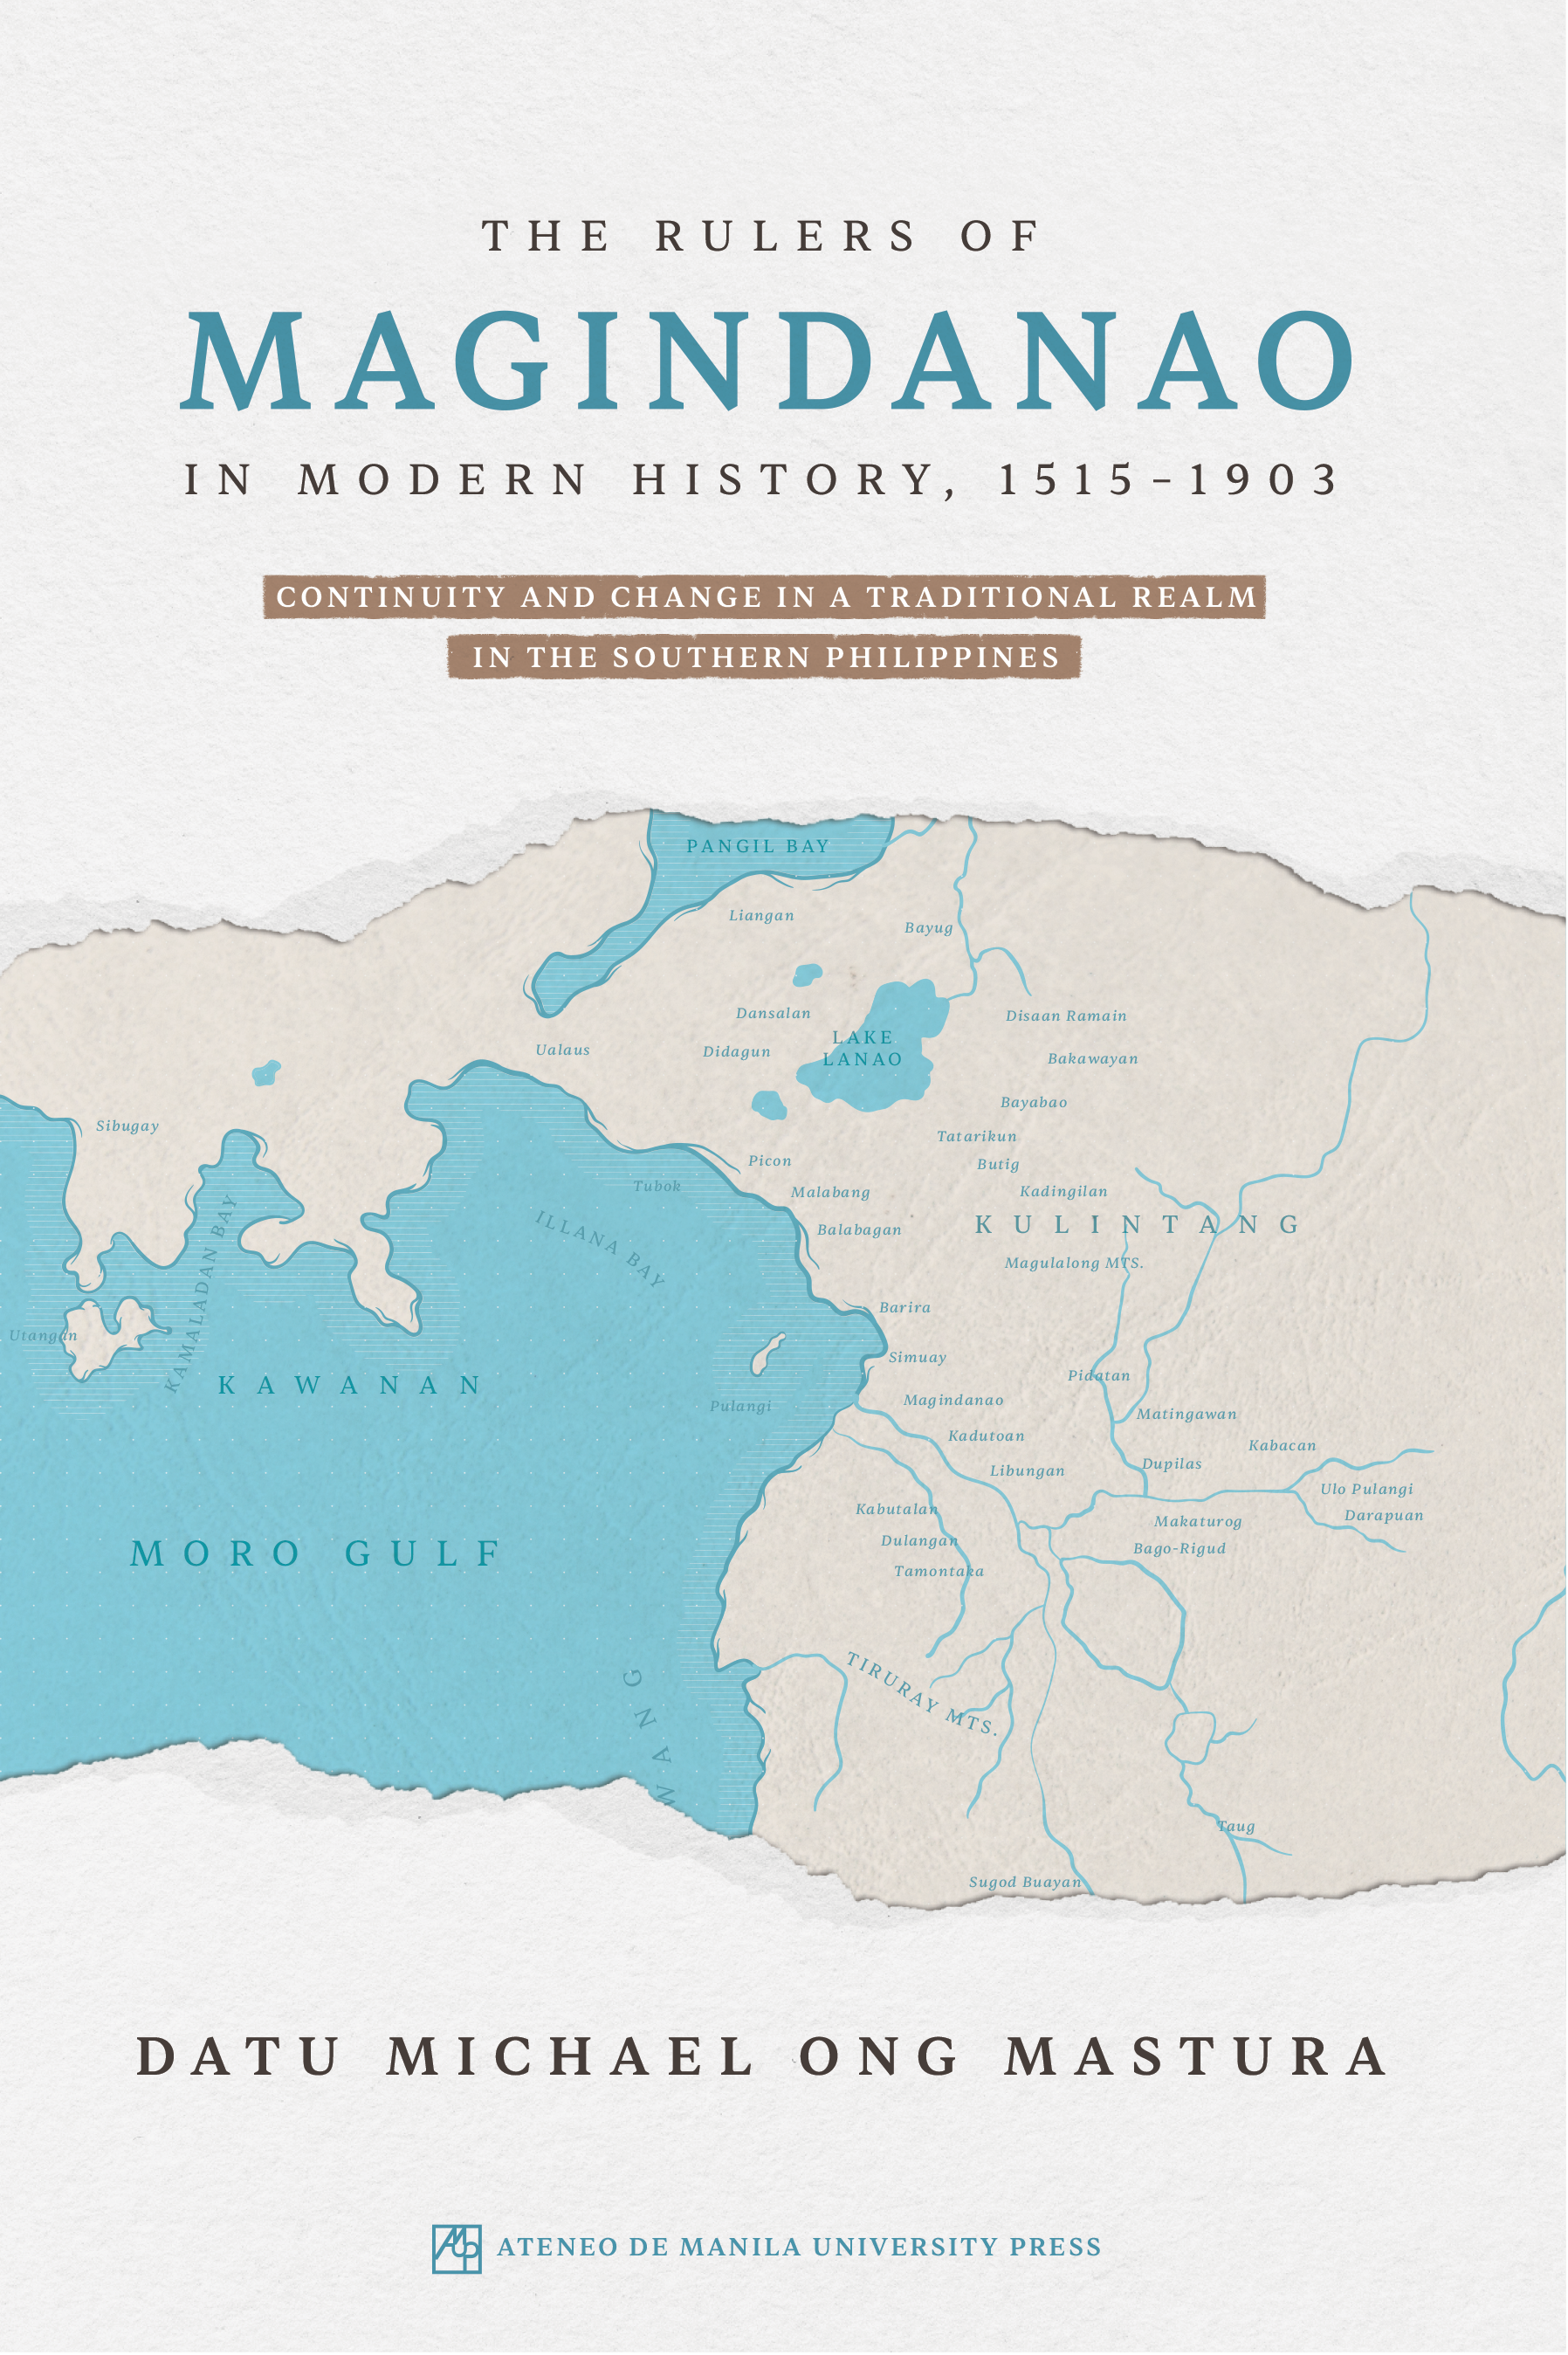 Book cover of The Rulers of Magindanao in Modern History, 1515-1903: Continuity and Change in a Traditional Realm in the Southern Philippines by Datu Michael Ong Mastura